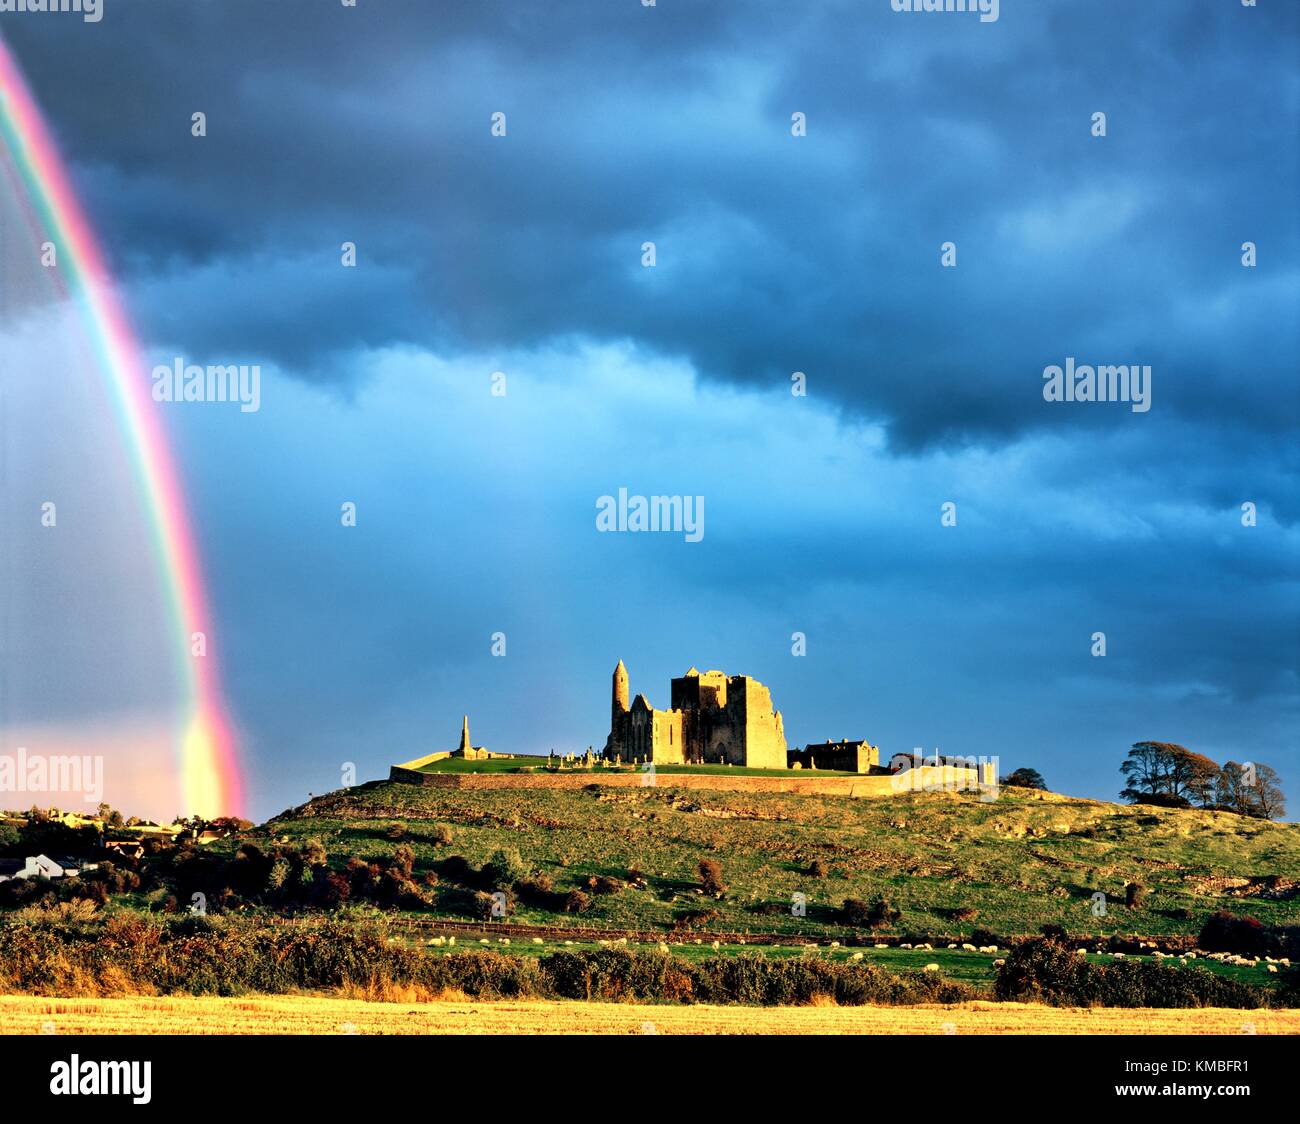 Mediaeval cathedral, round tower and Cormac’s Chapel sit on the Rock of Cashel, County Tipperary, Ireland. Sunlit with rainbow. Stock Photo